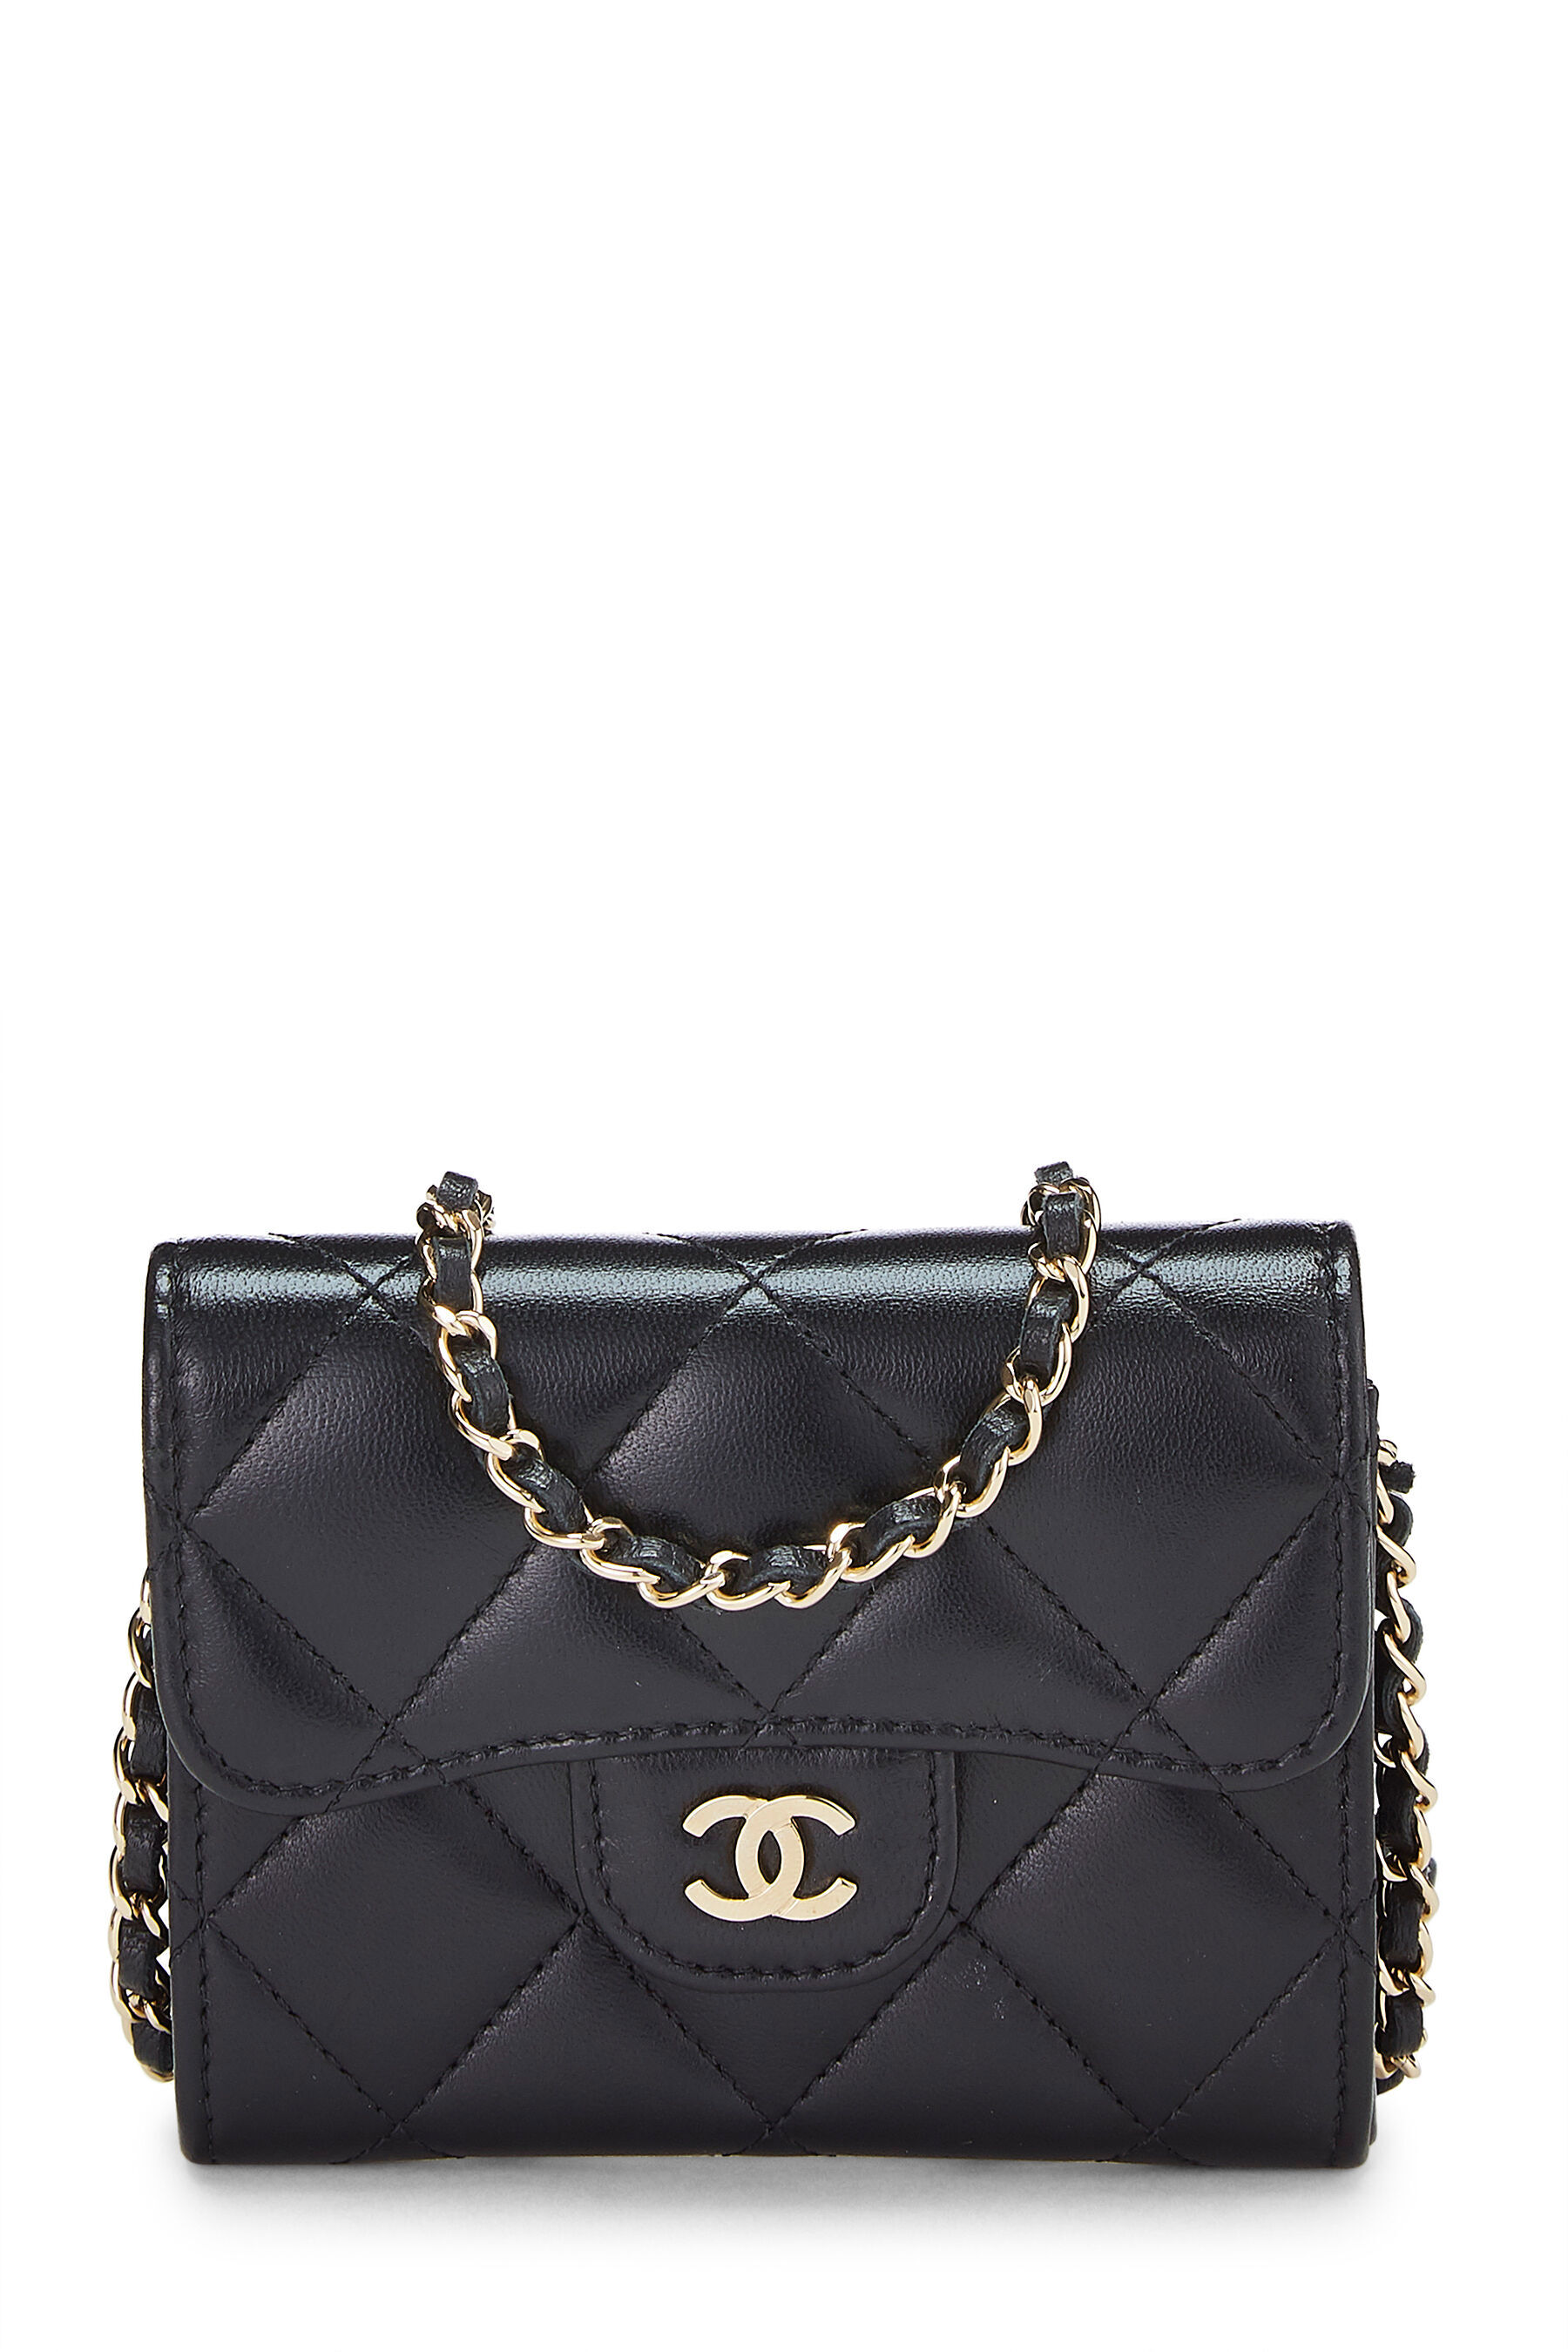 Chanel Boy Large Stitched Quilted Bag  Bragmybag